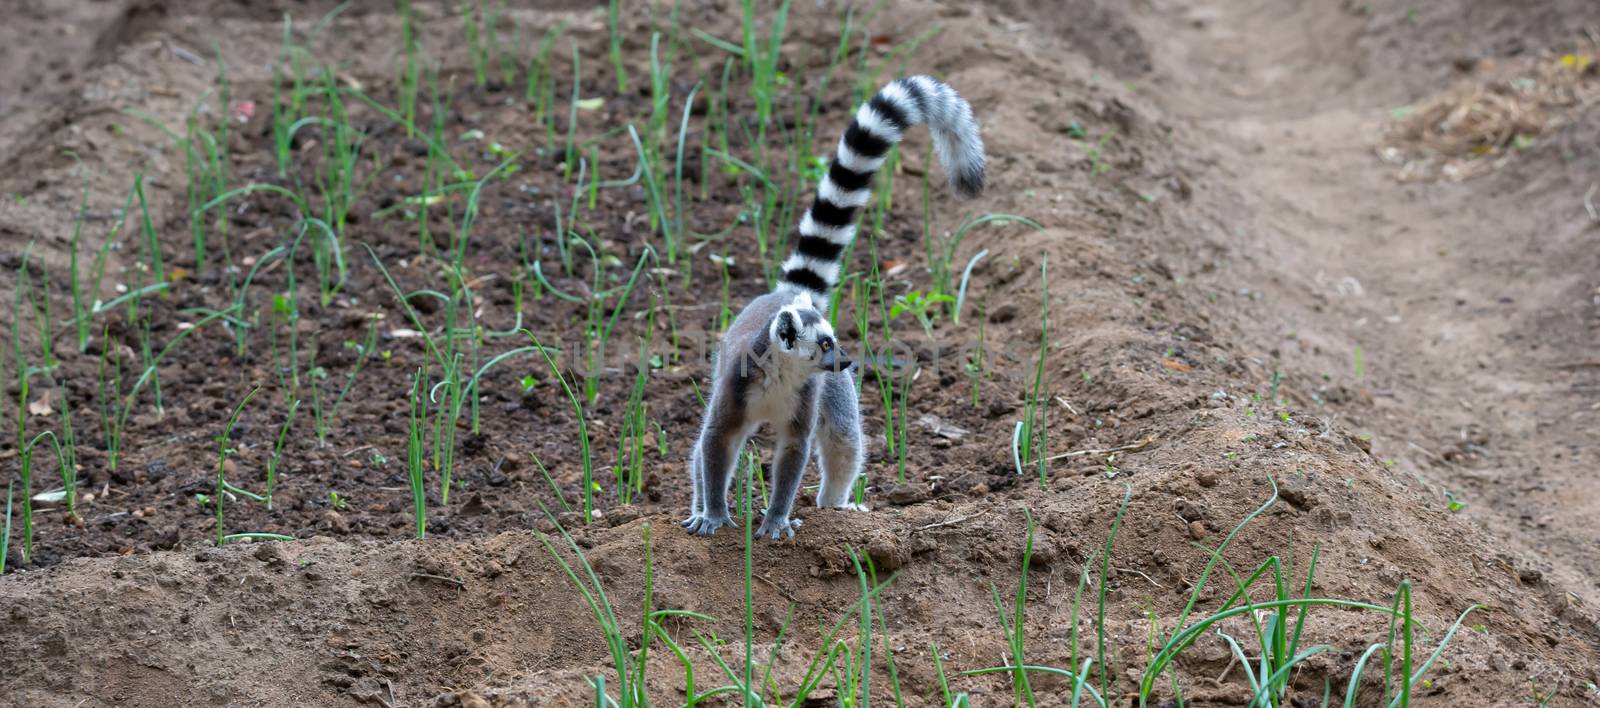 One ring-tailed lemur hops around in the fields of the locals